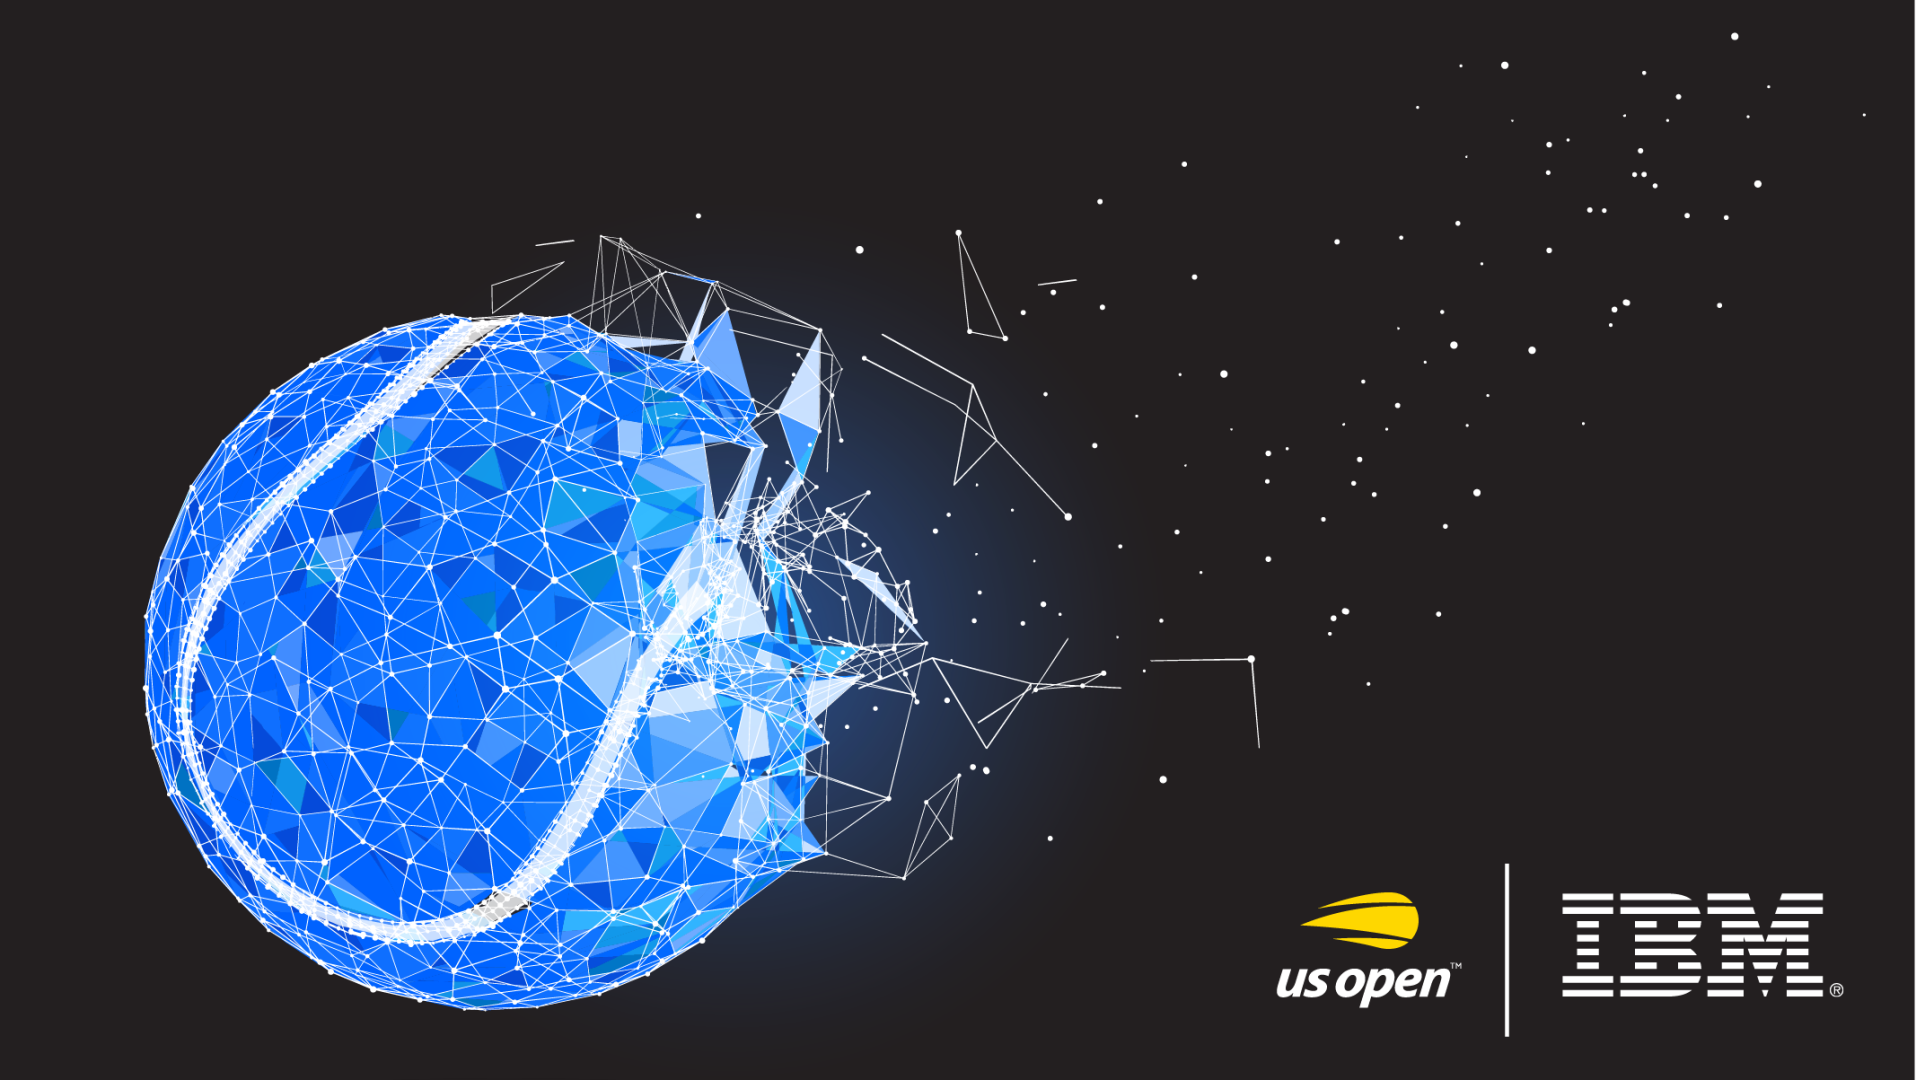 IBM is Empowering the US Open